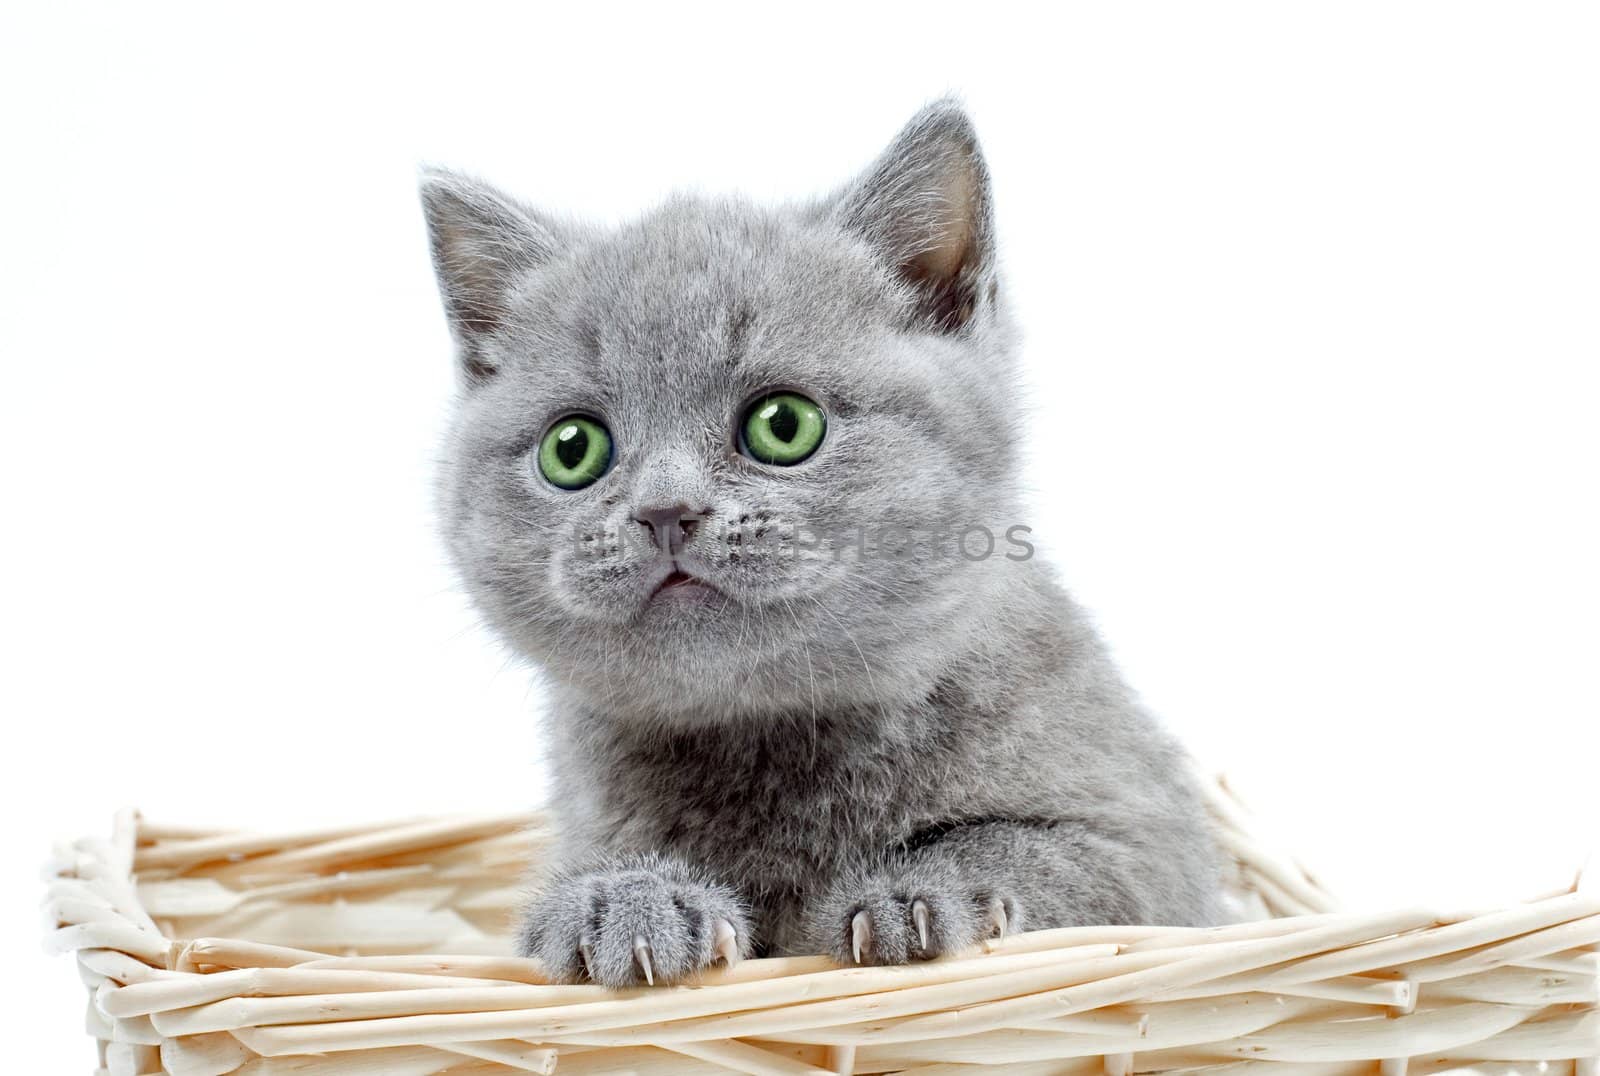 kitty with green eyes sits in a basket